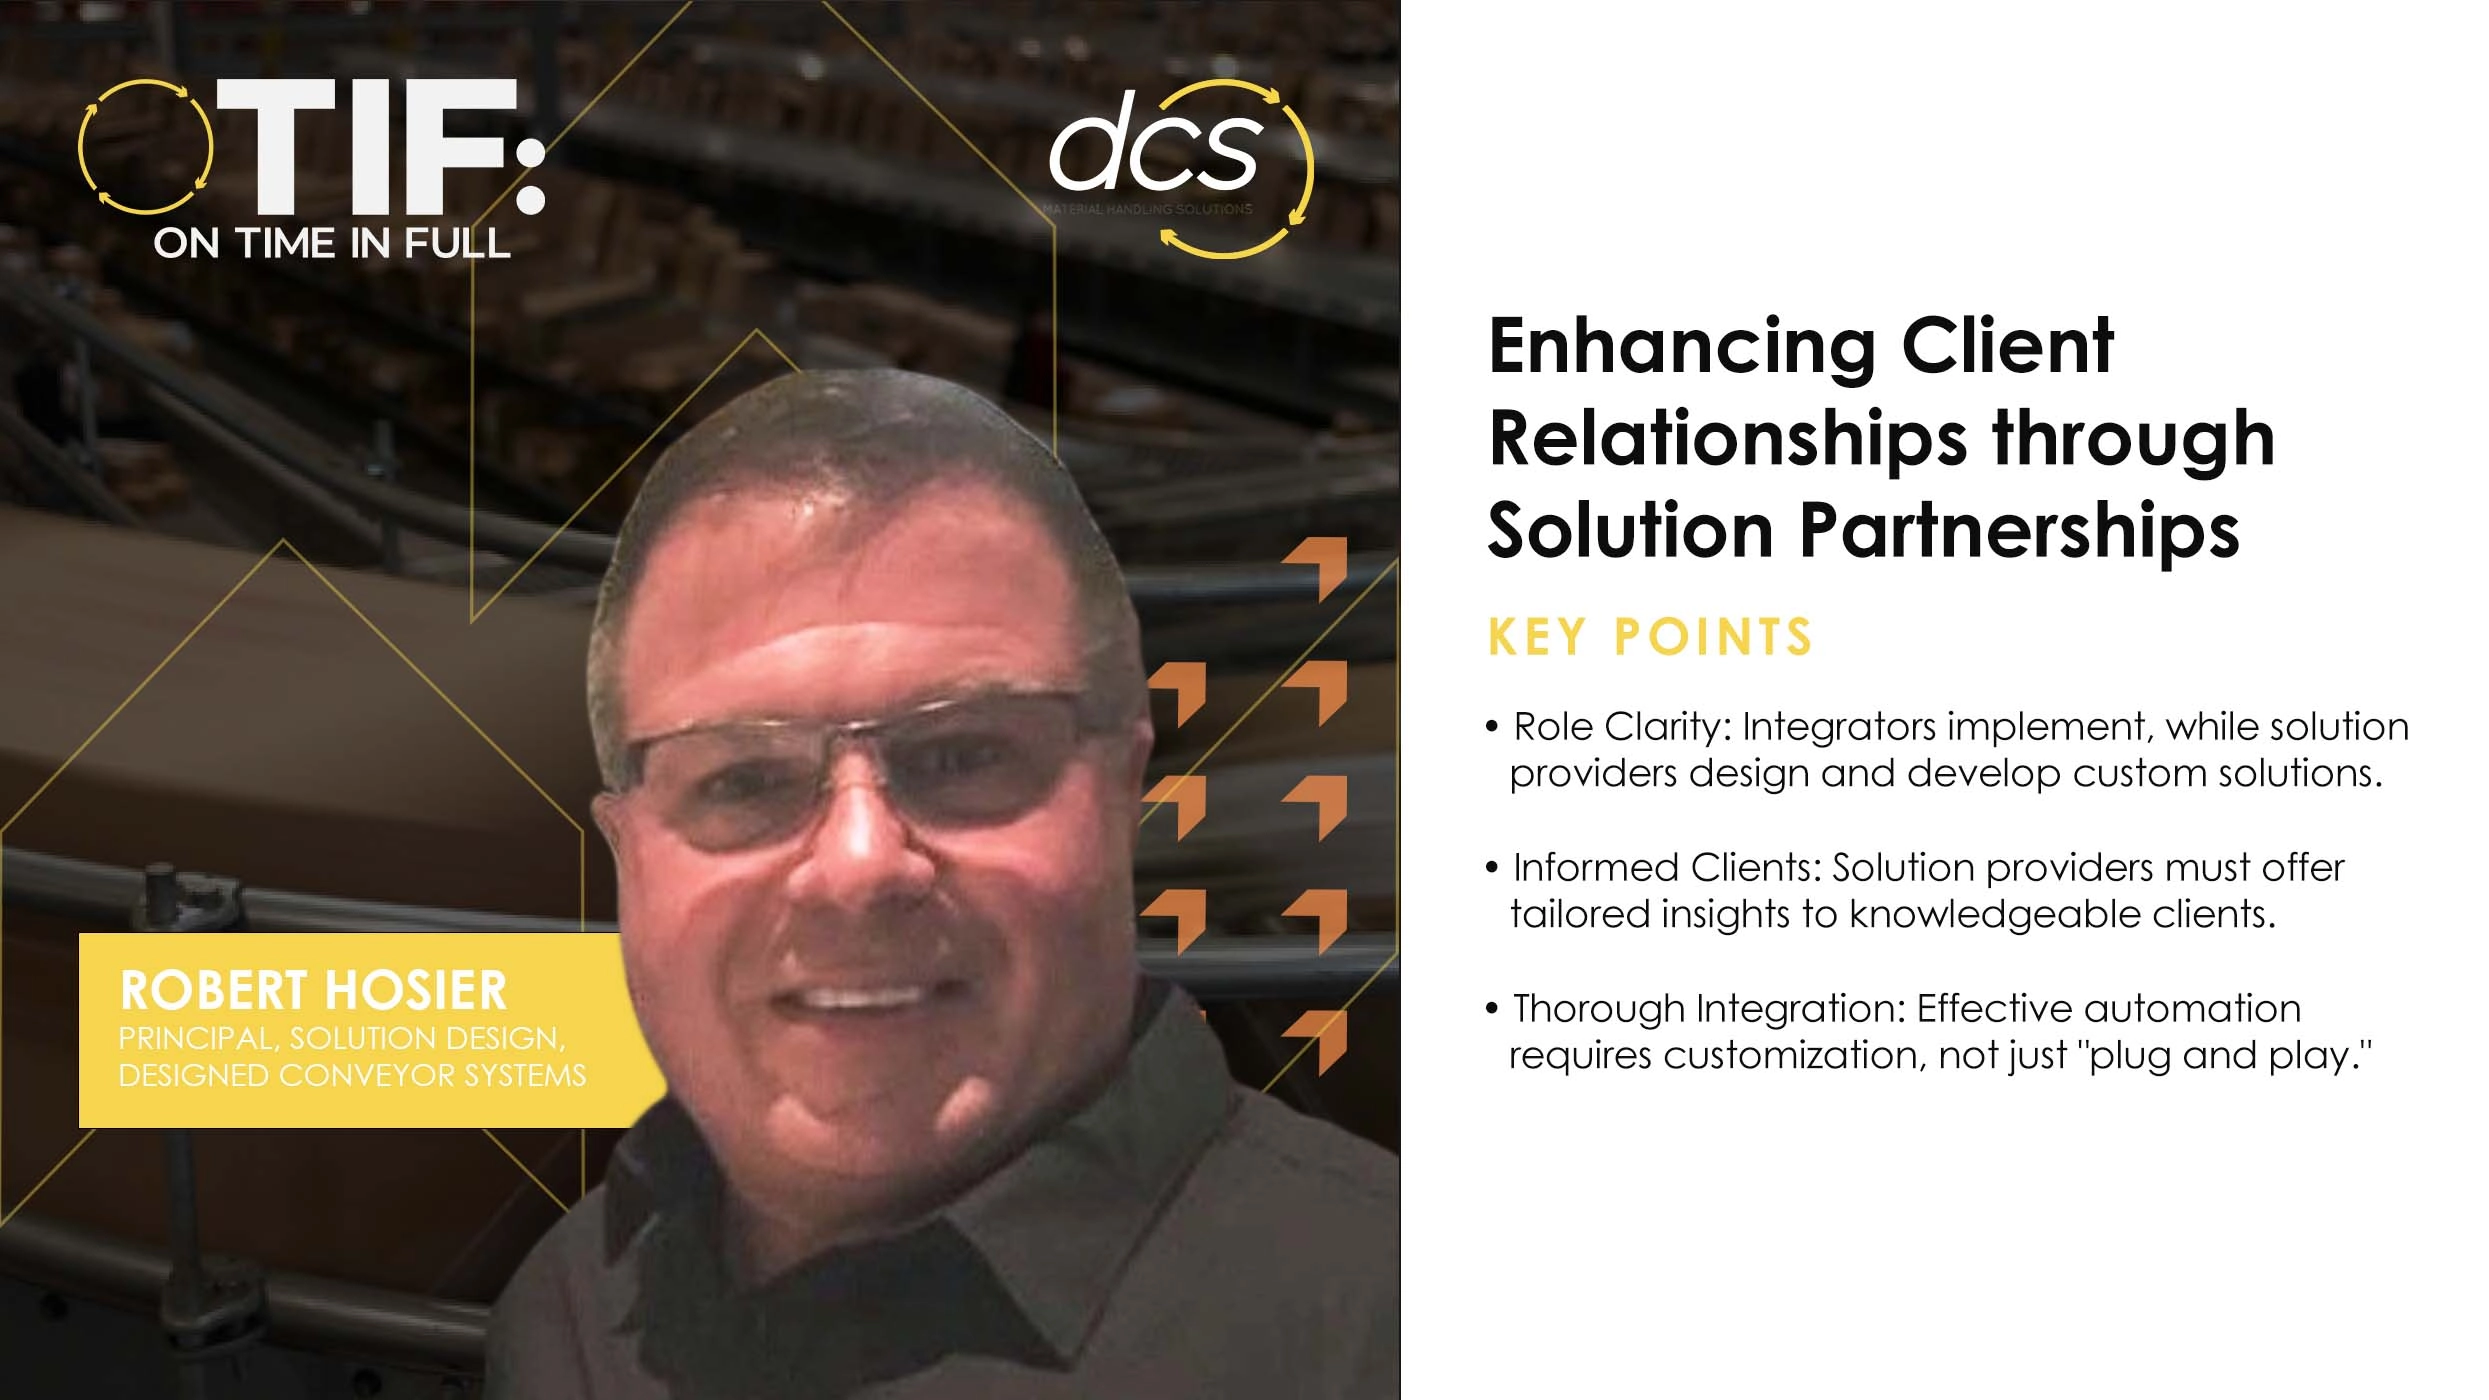 Enhancing Client Relationships through Solution Partnerships